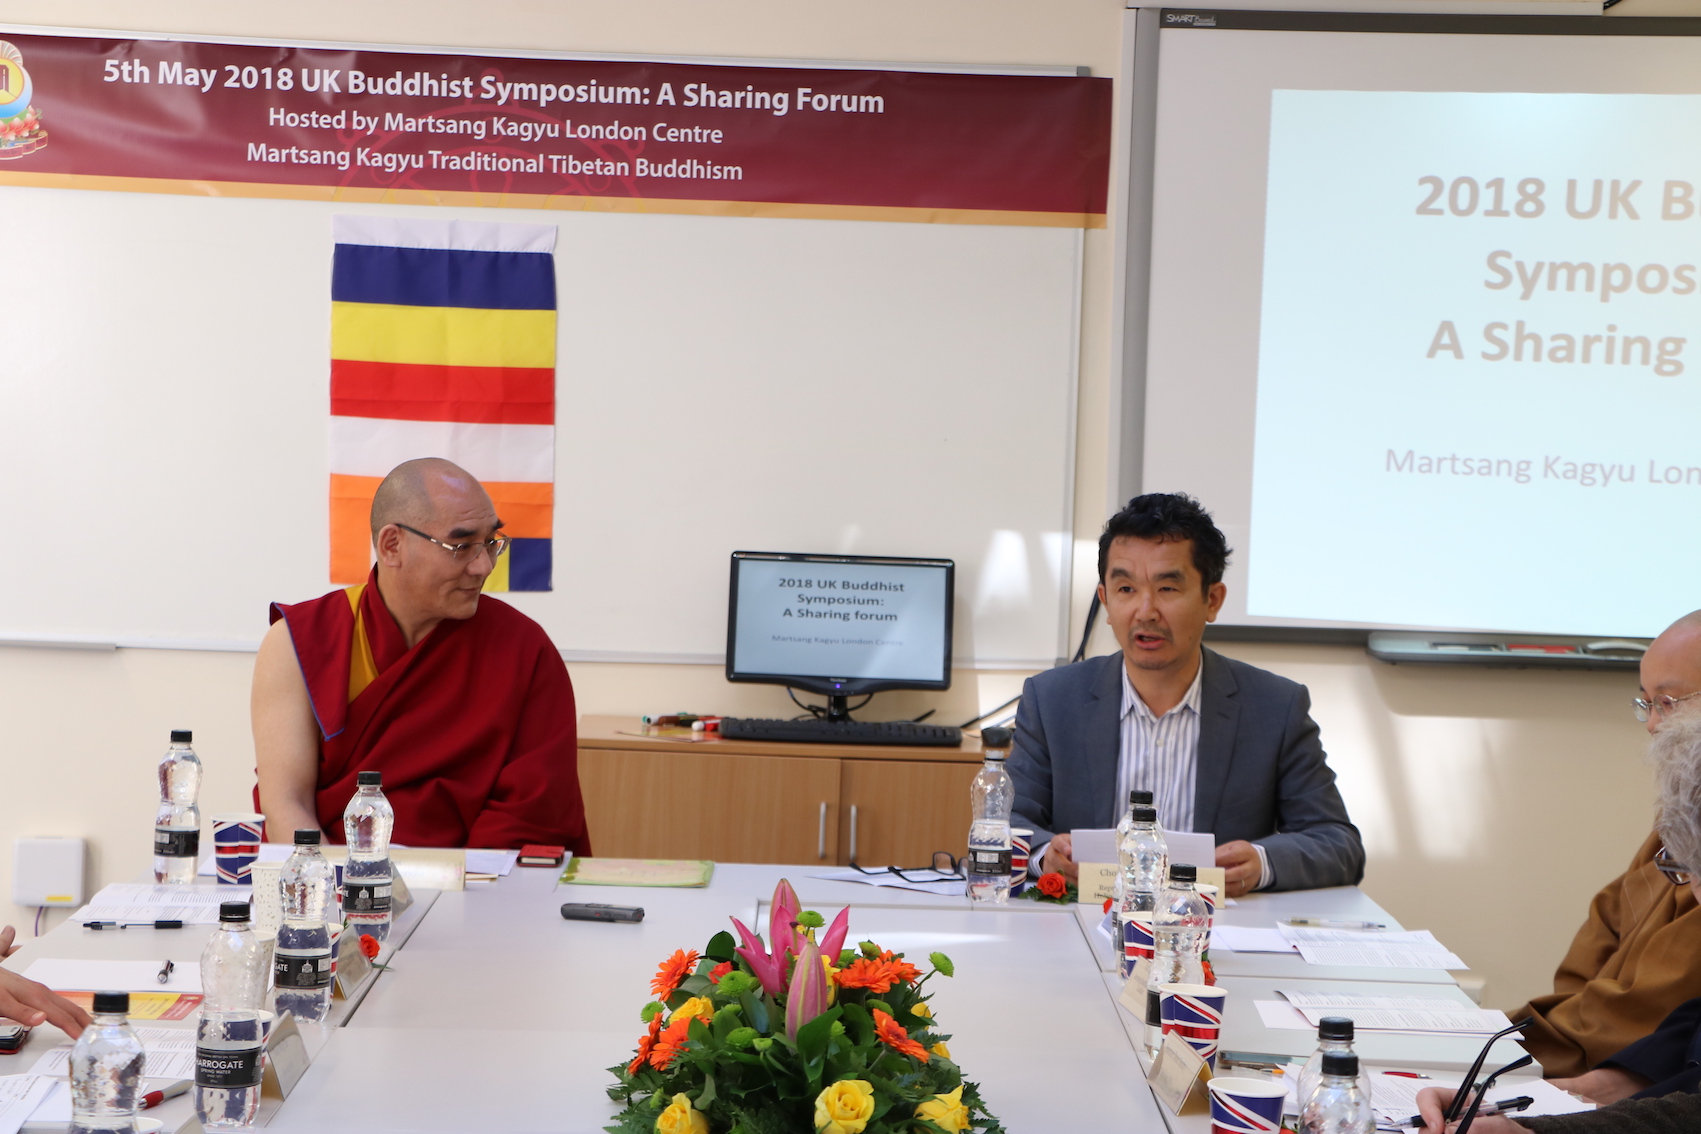 Representative of the Office of the Dalai Lama gives a talk at the beginning of the UK Buddhist Symposium hosted by Martsang Kagyu London Centre